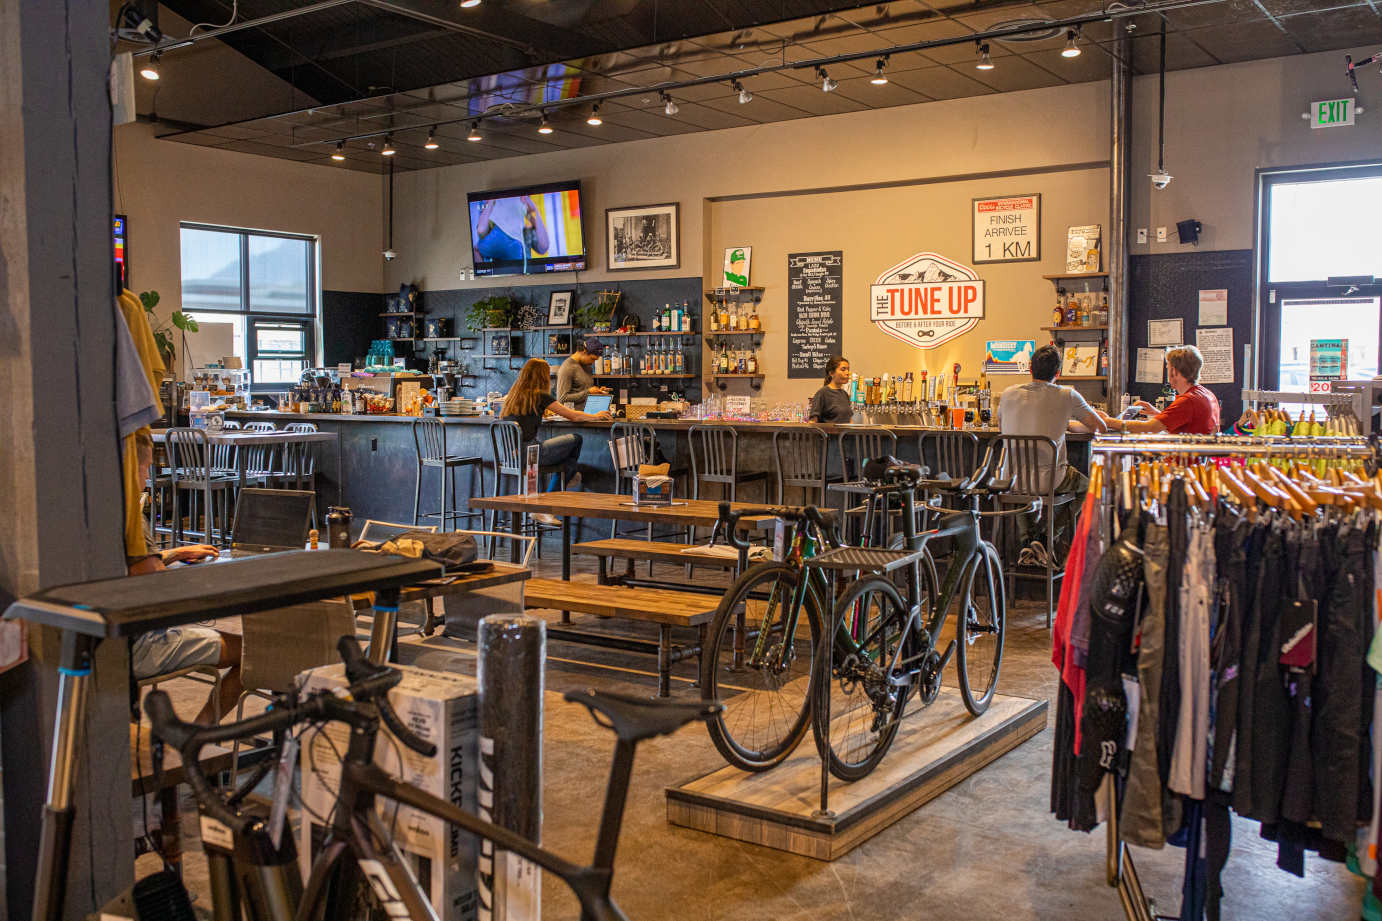 Interior, bike shop adjacent to the seating area, seated guests and staff at the bar